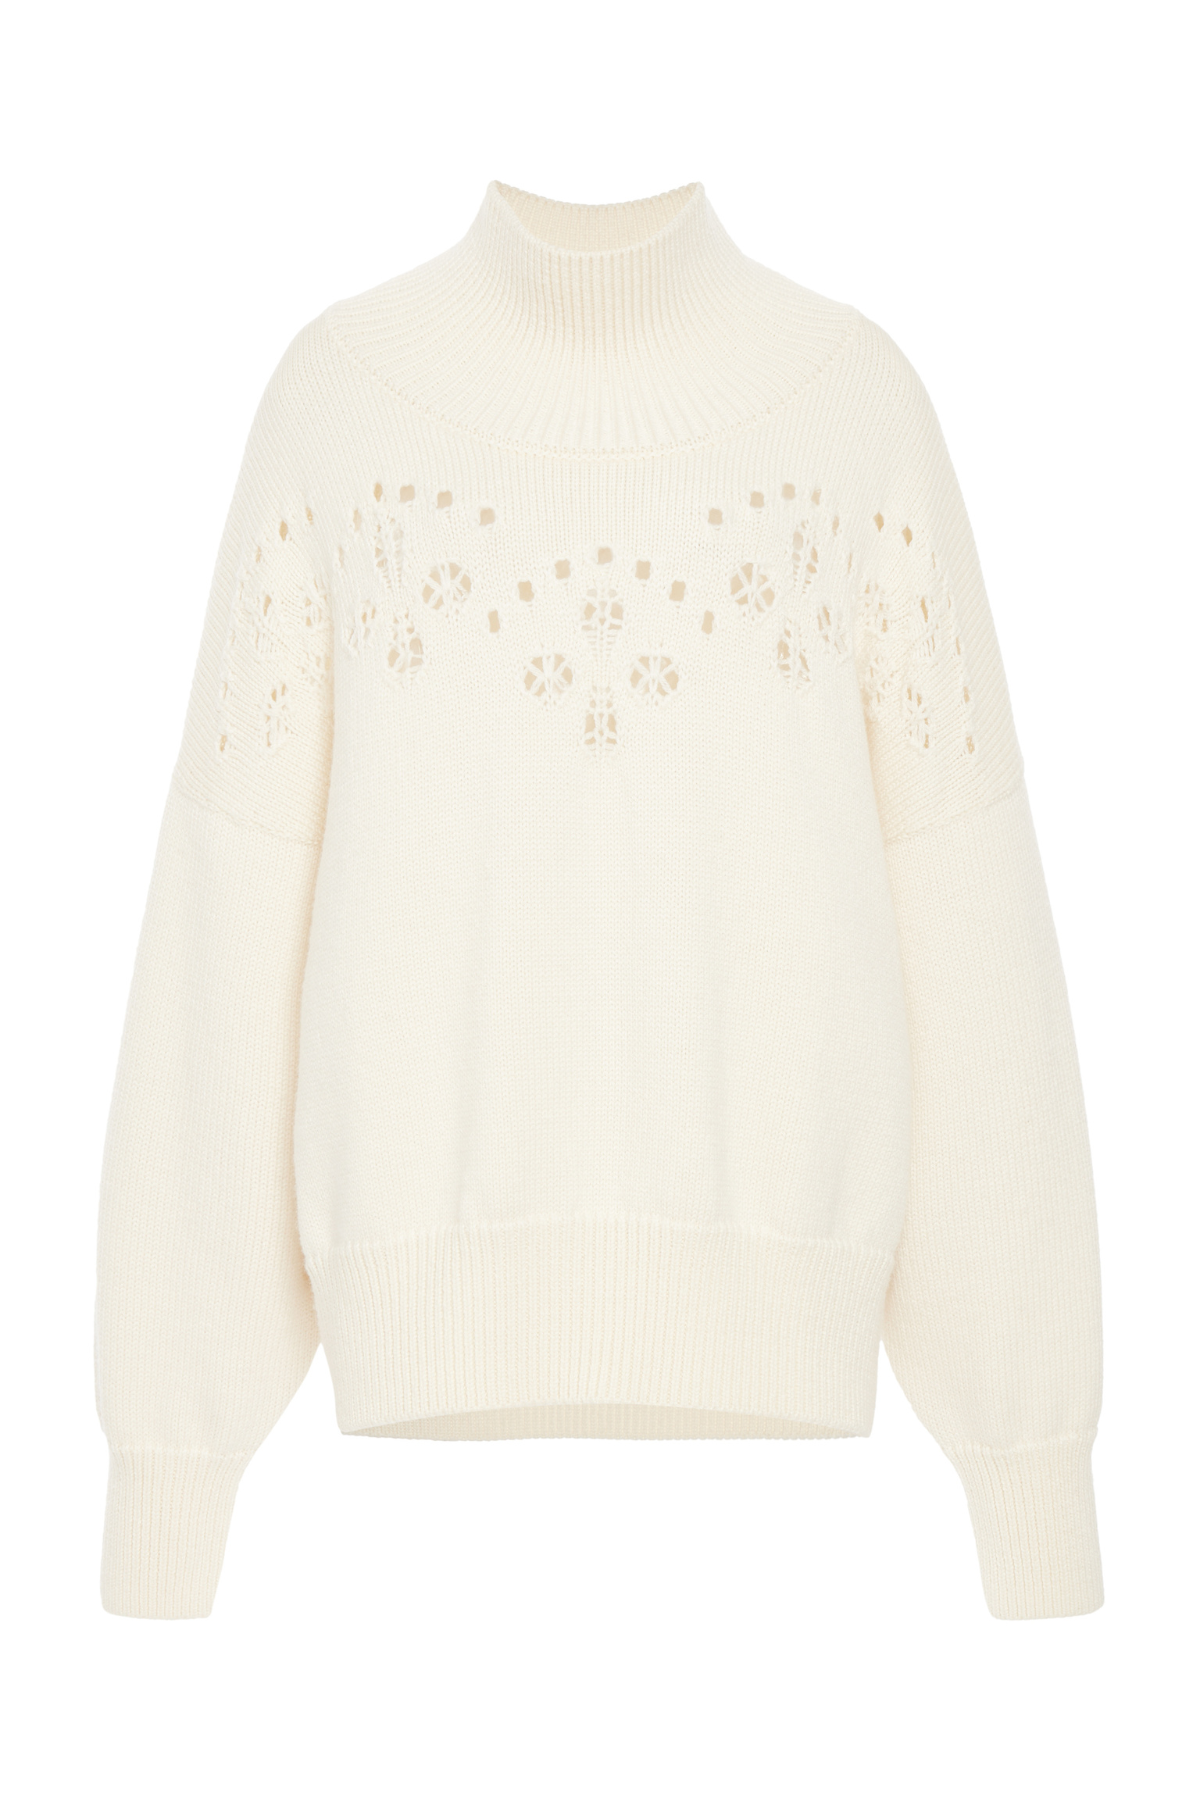 knitted white cutout sweater